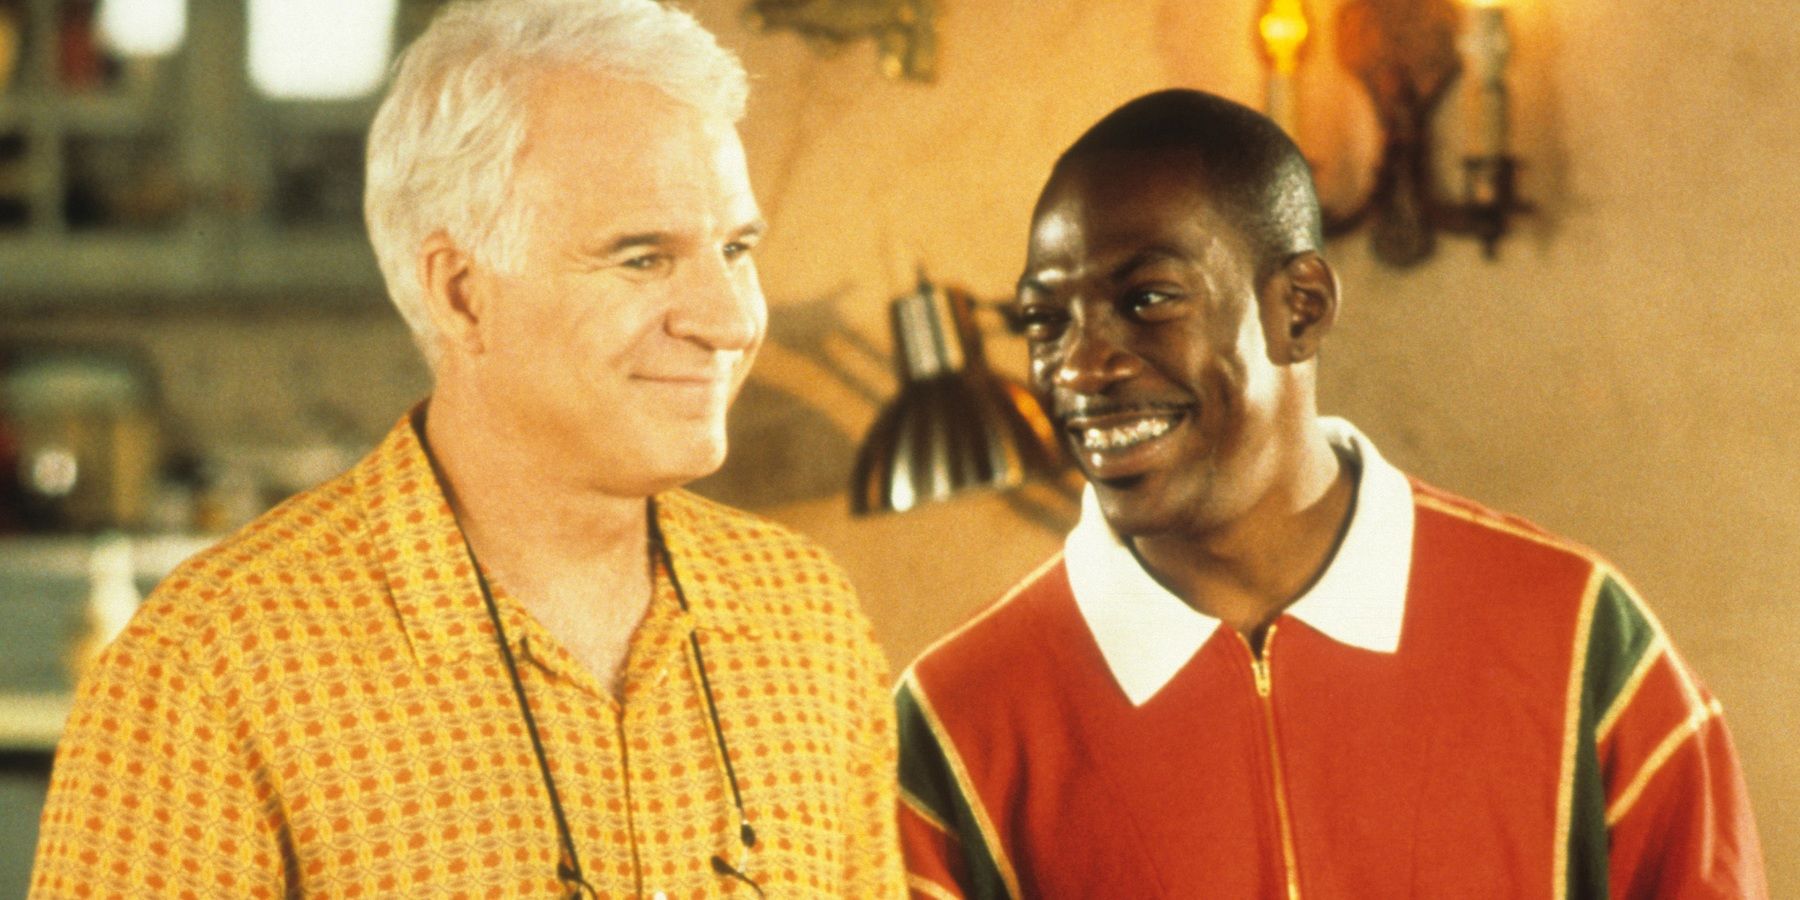 Bobby Bowfinger and Jiff Ramsey in the production office in Bowfinger